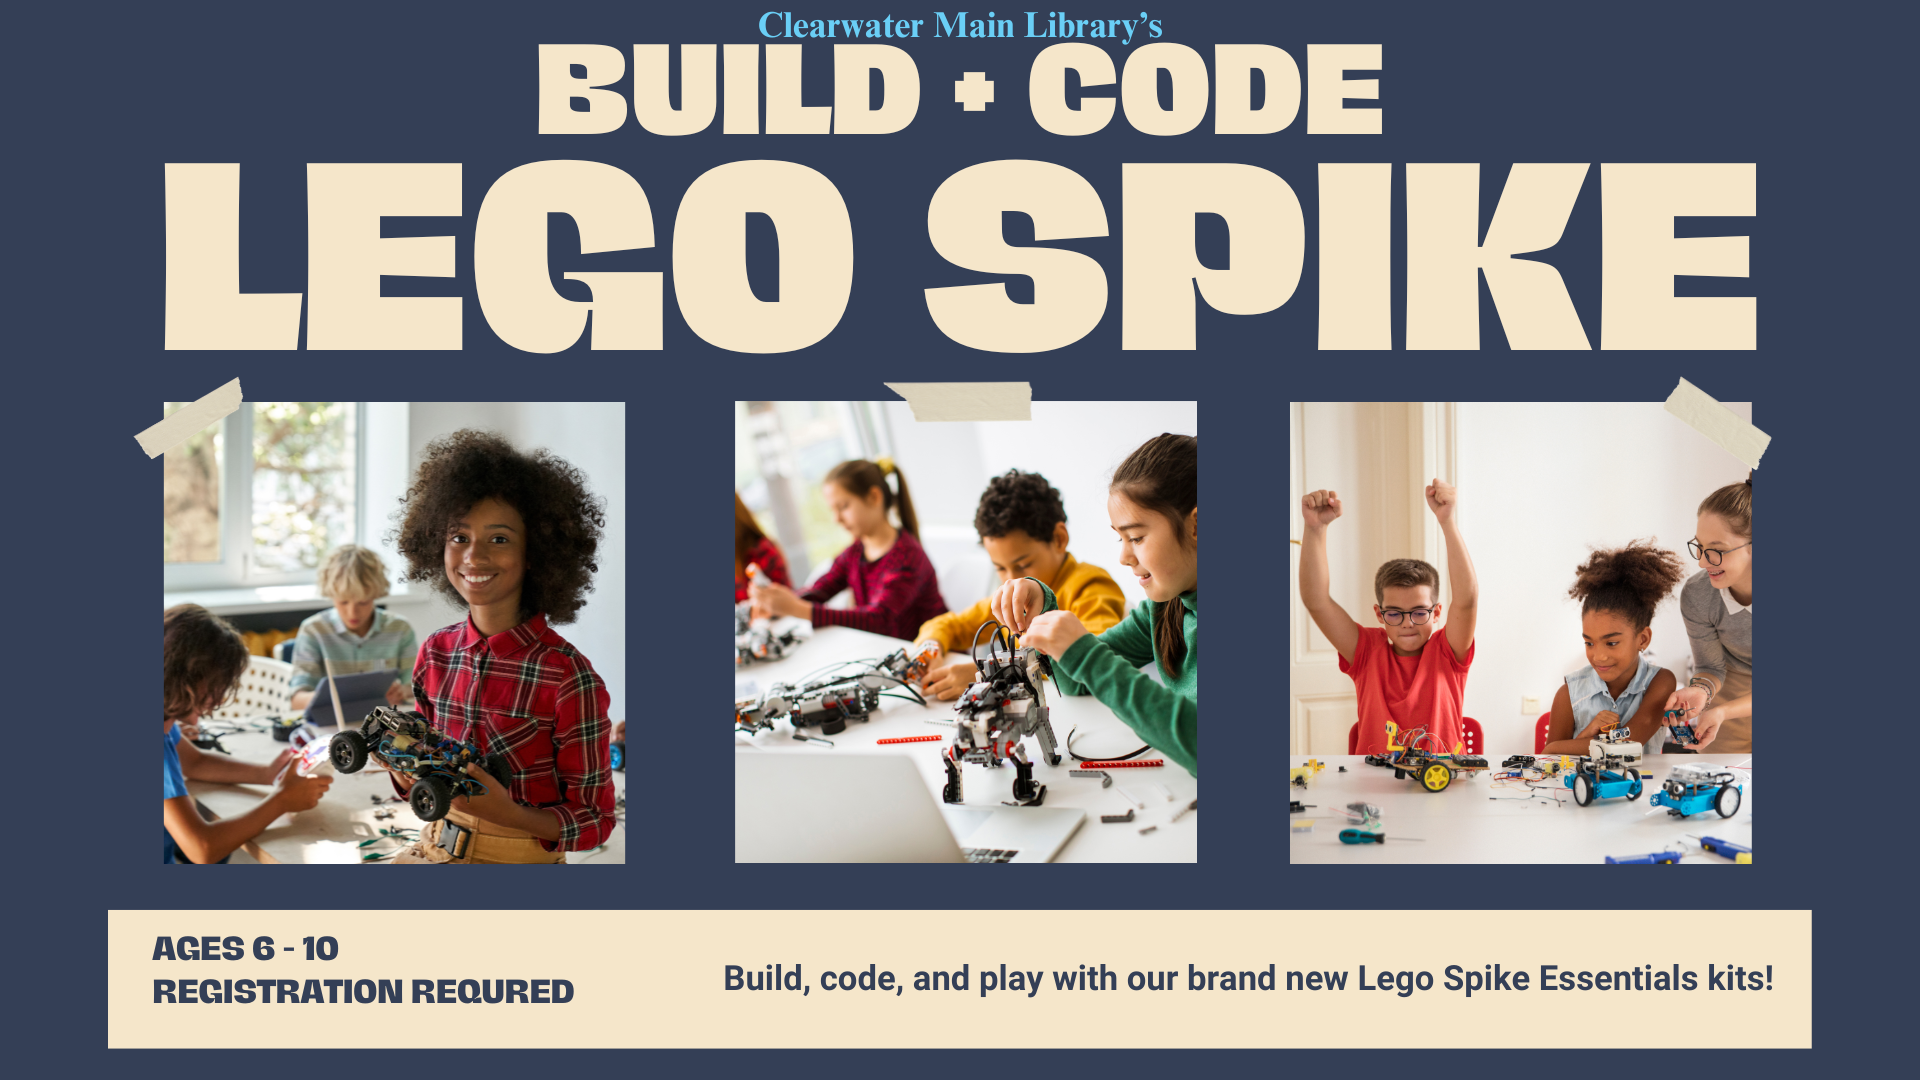 Build, code, and play with our brand new Lego Spike Essentials kit. Registration is required. For ages 6-10.